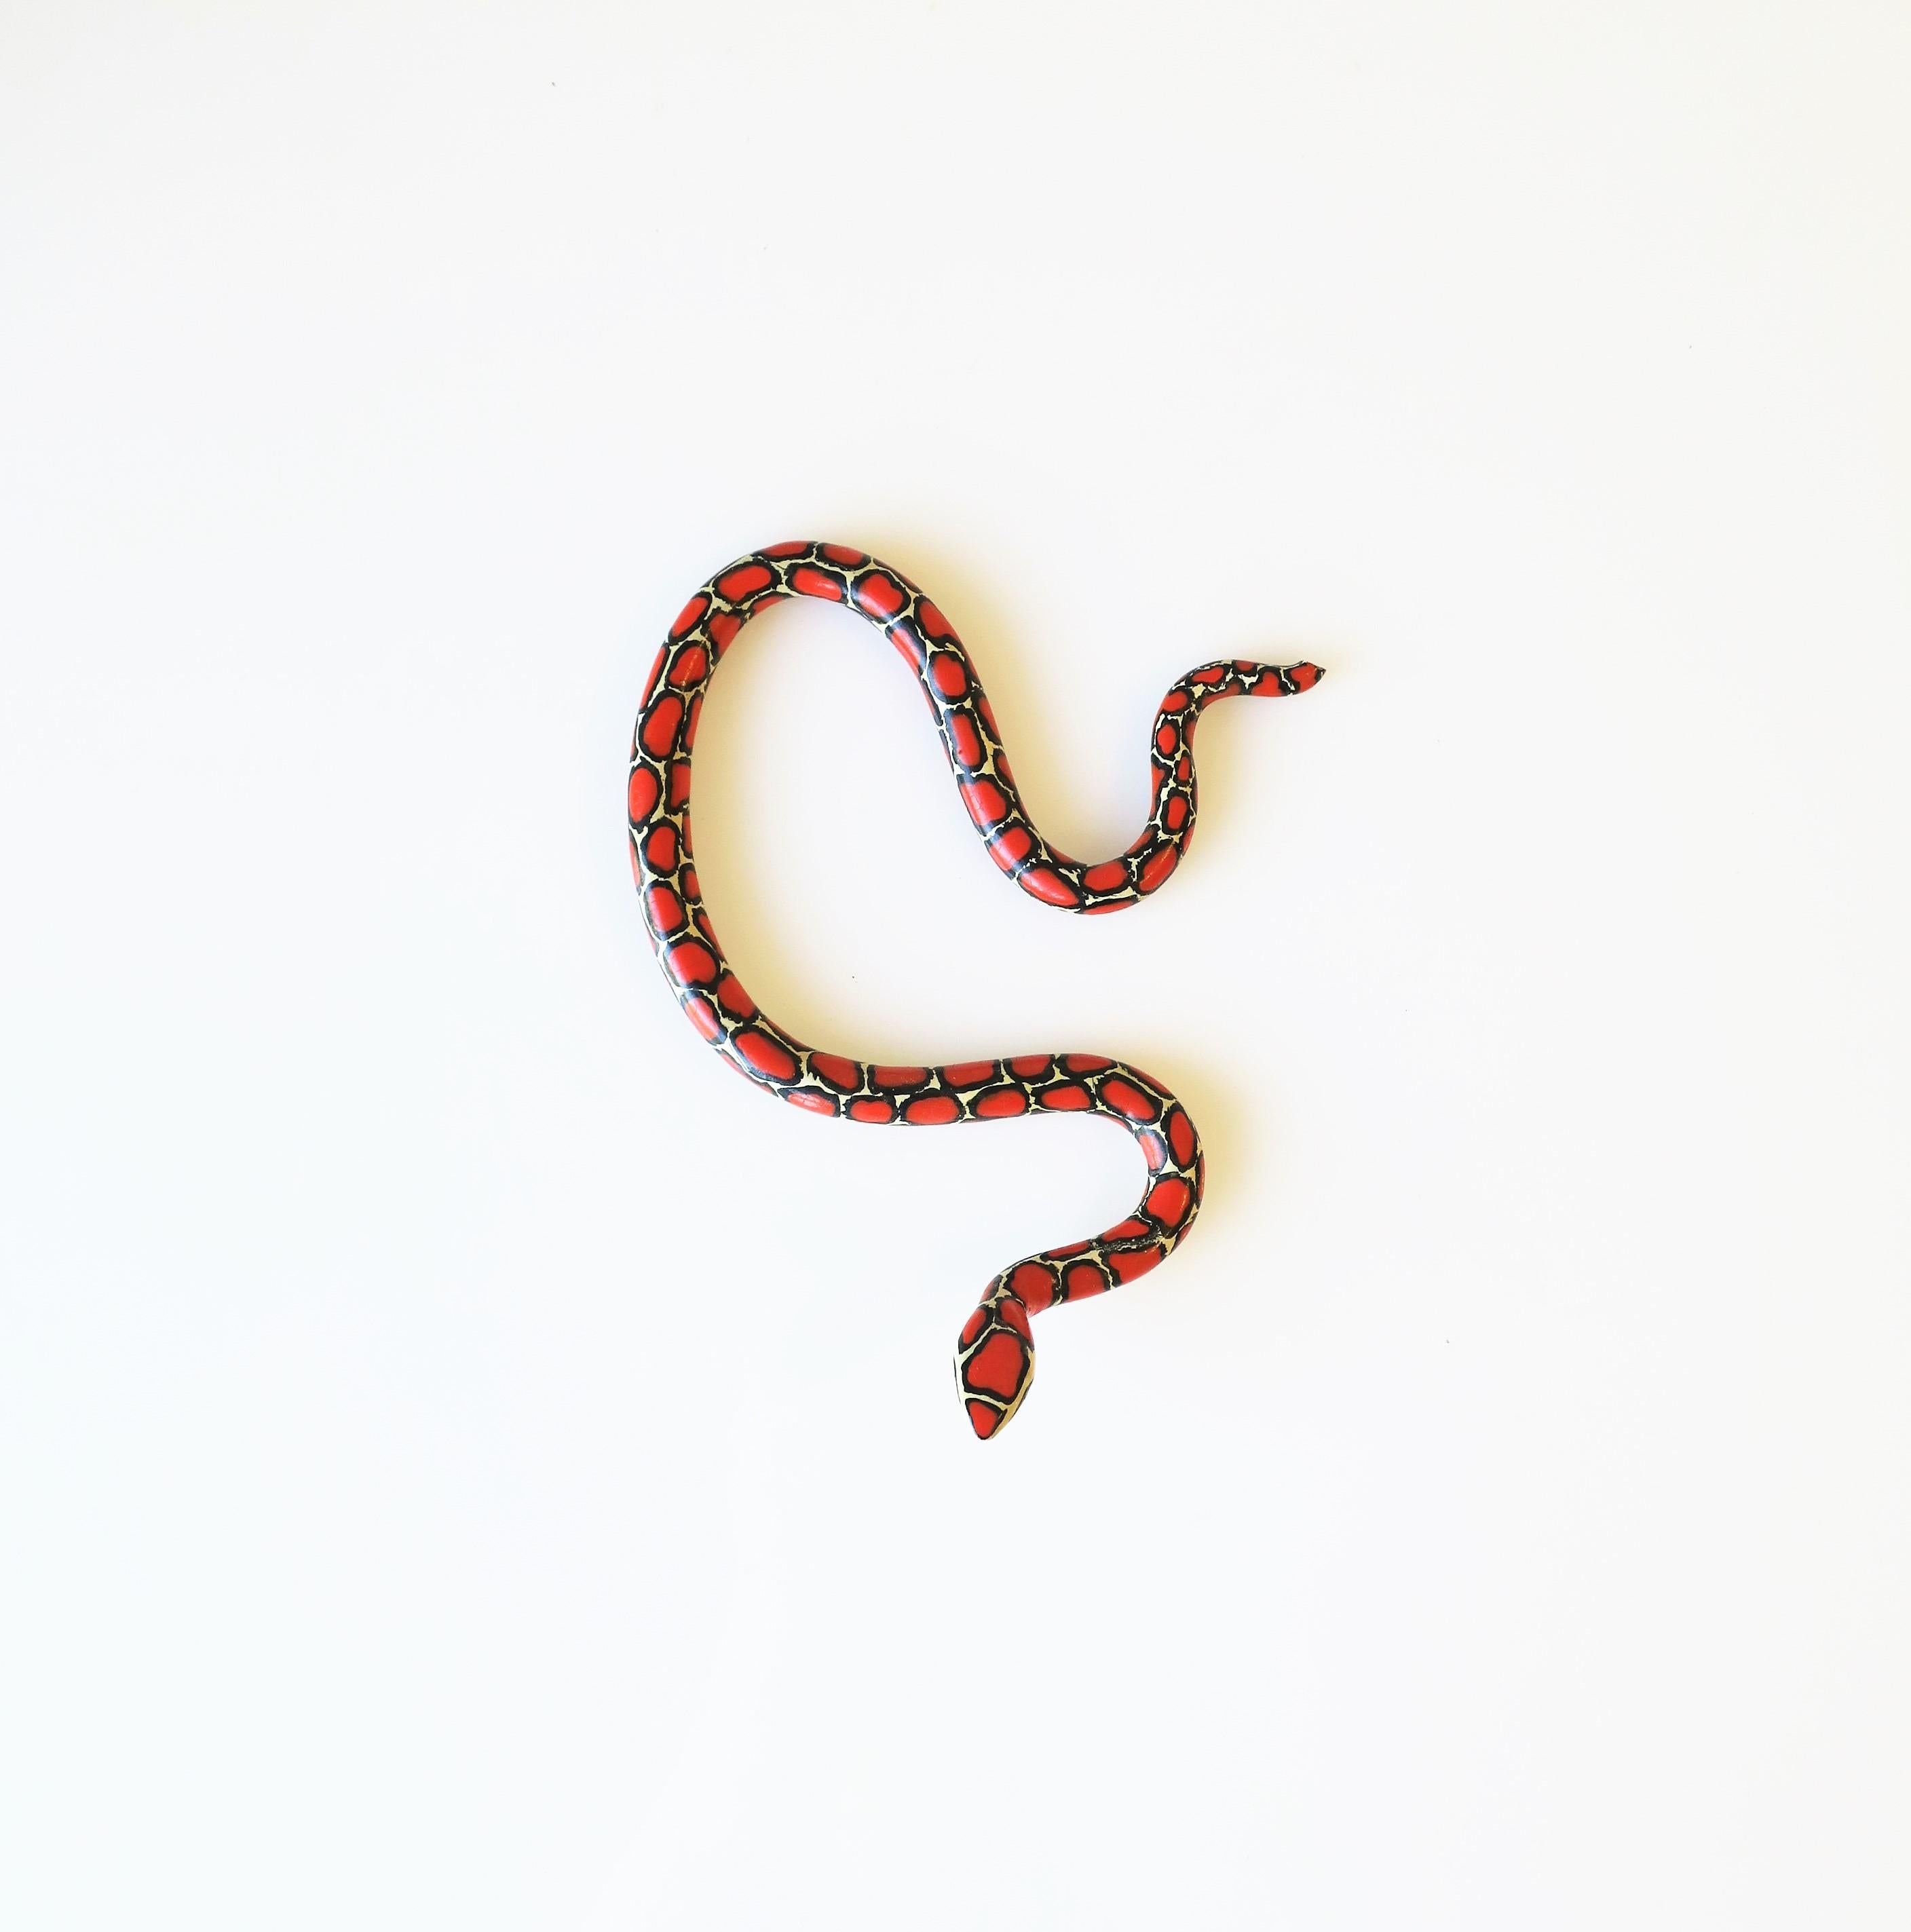 A vintage red, black and white terracotta ceramic snake with green eyes, circa 20th century. Dimensions: 4.25